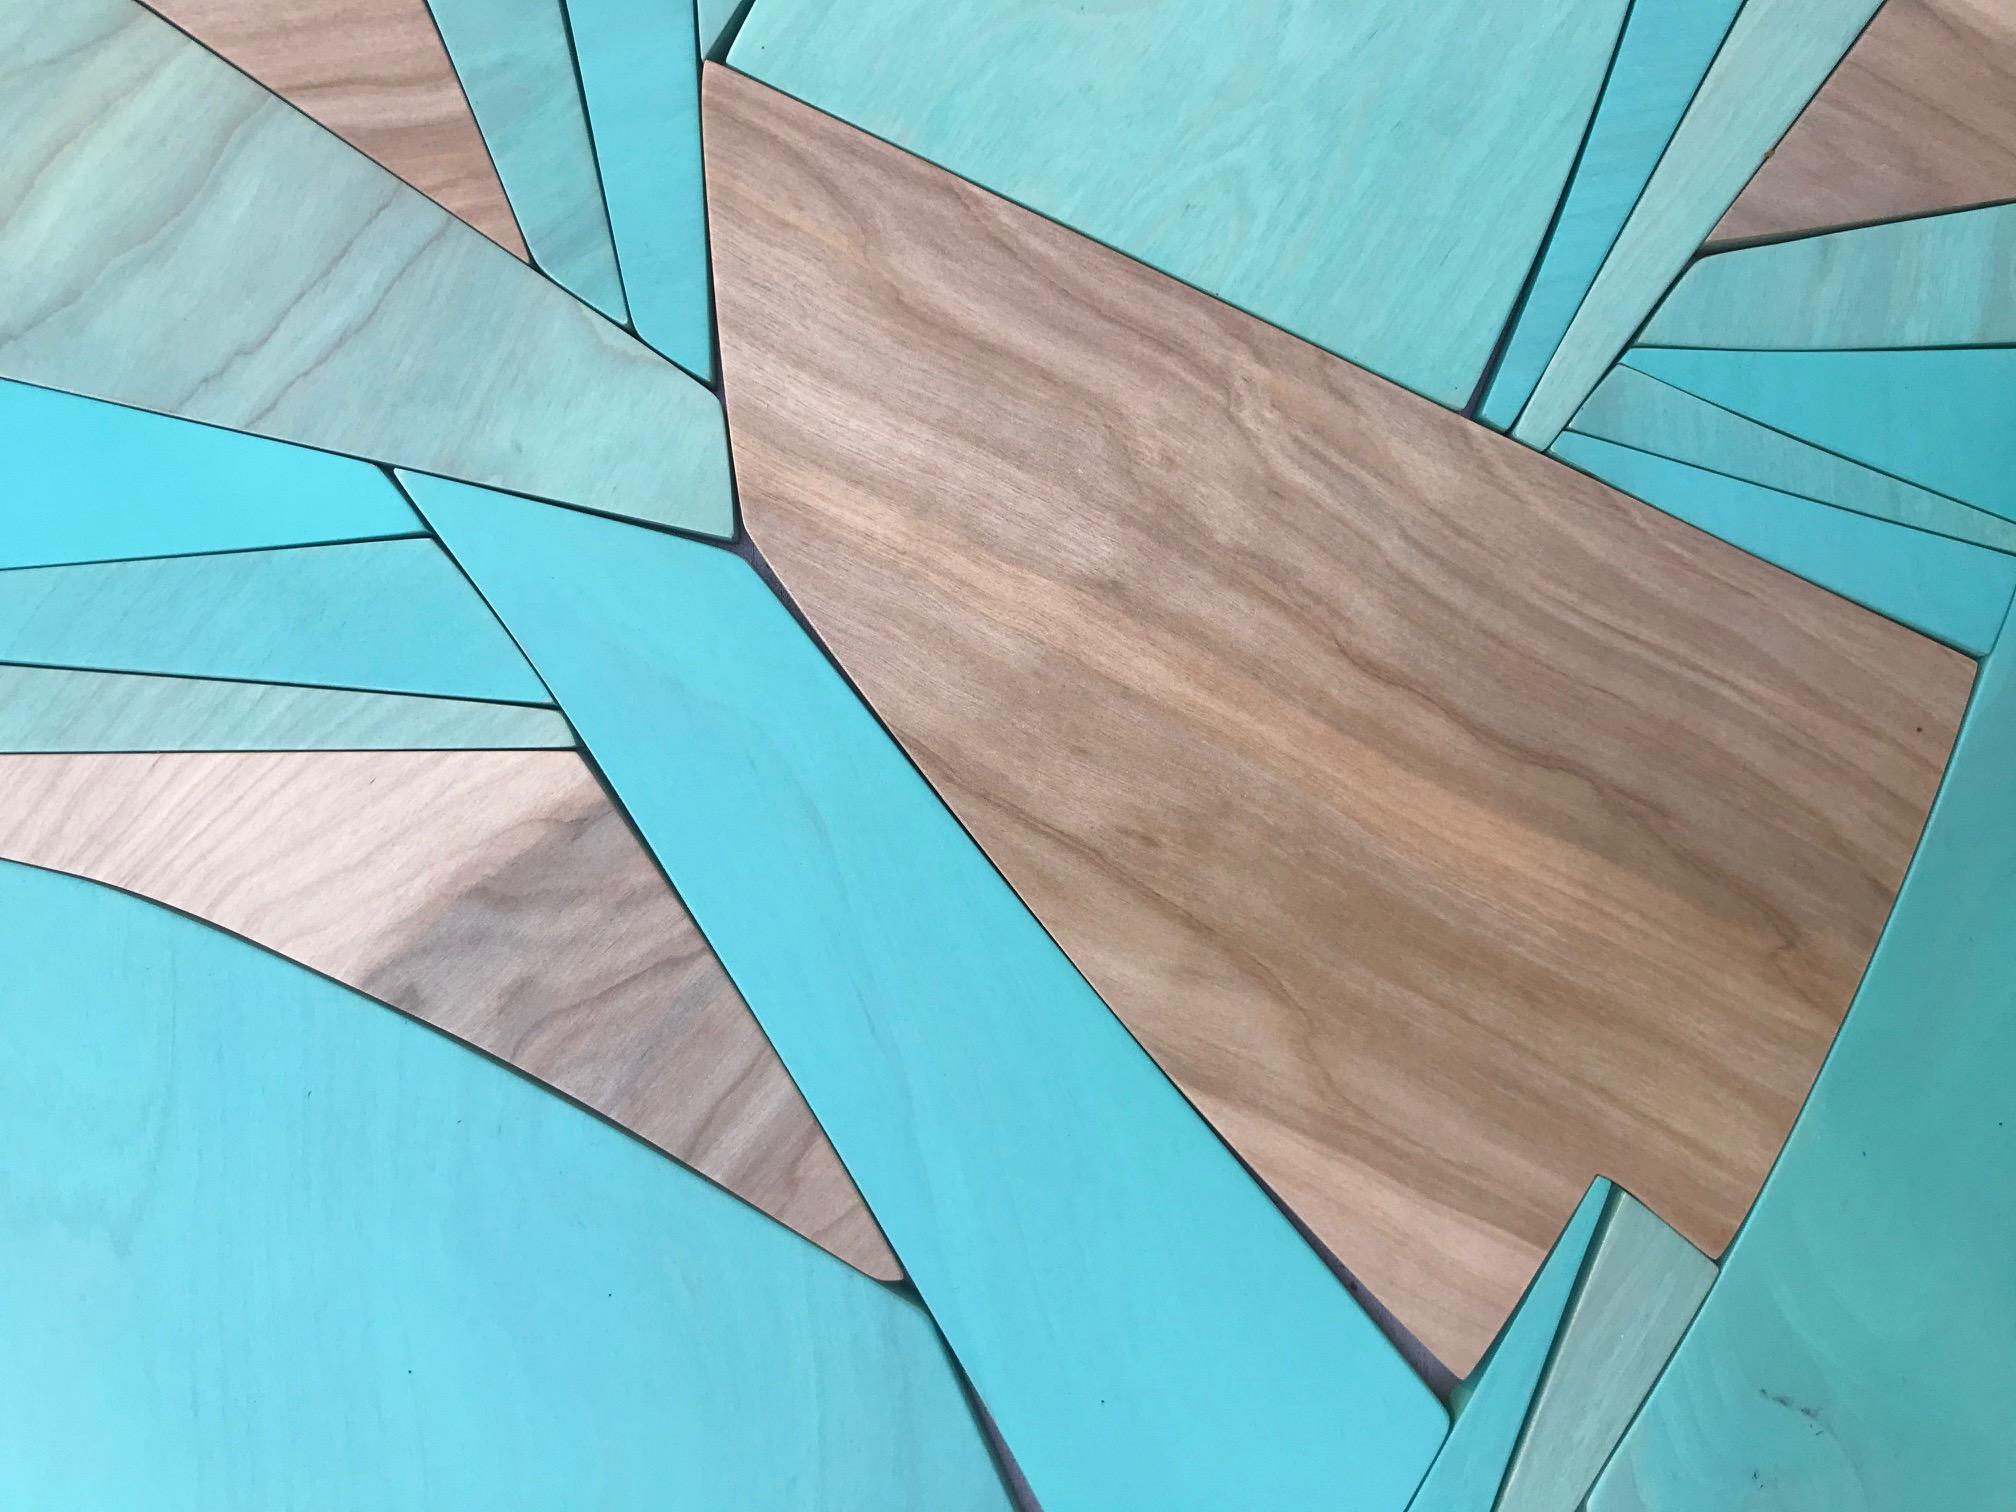 Coastal Span is a vibrant, bold, monochromatic wall sculpture made from acrylic washes, enamel and latex paints on Birch panels and MDF. The varying opacities of blue washed paint over the birch panels allow the brown wood grain to remain visible